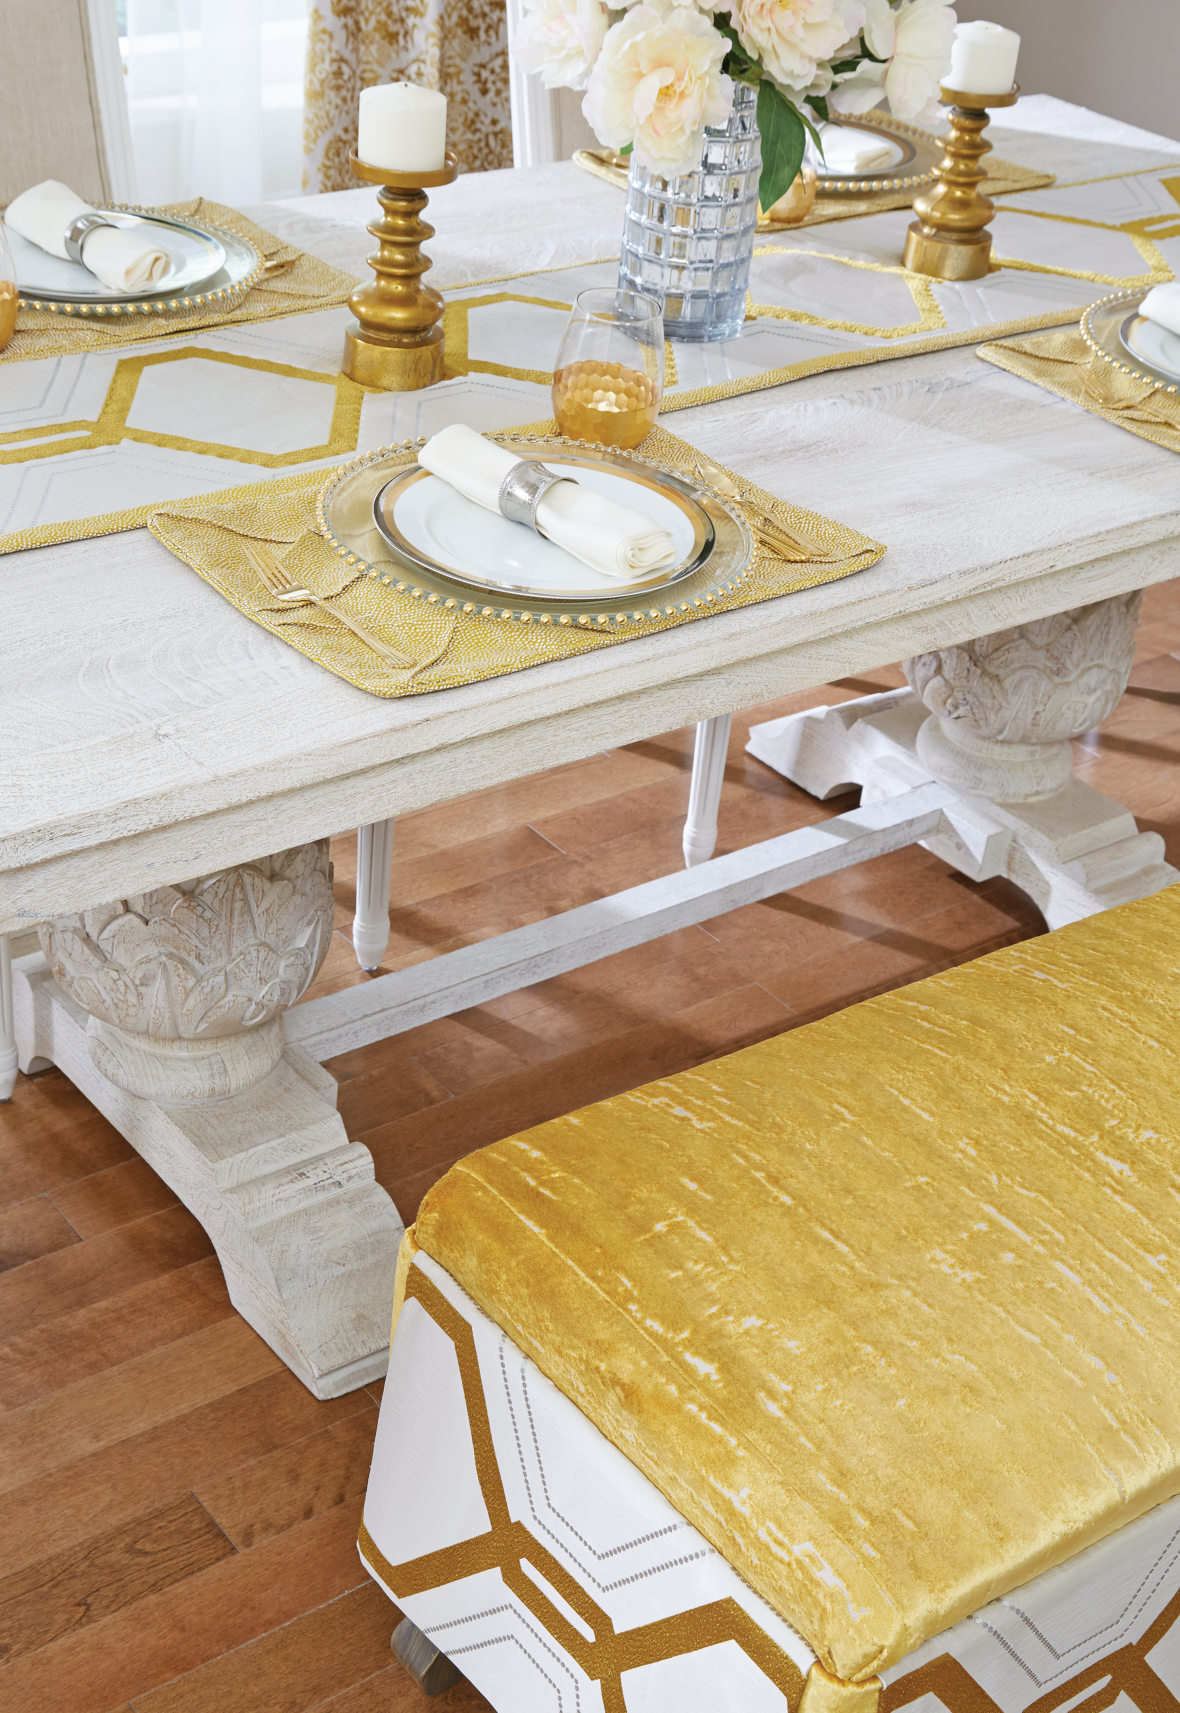 Exquisite Dining - Tablescape